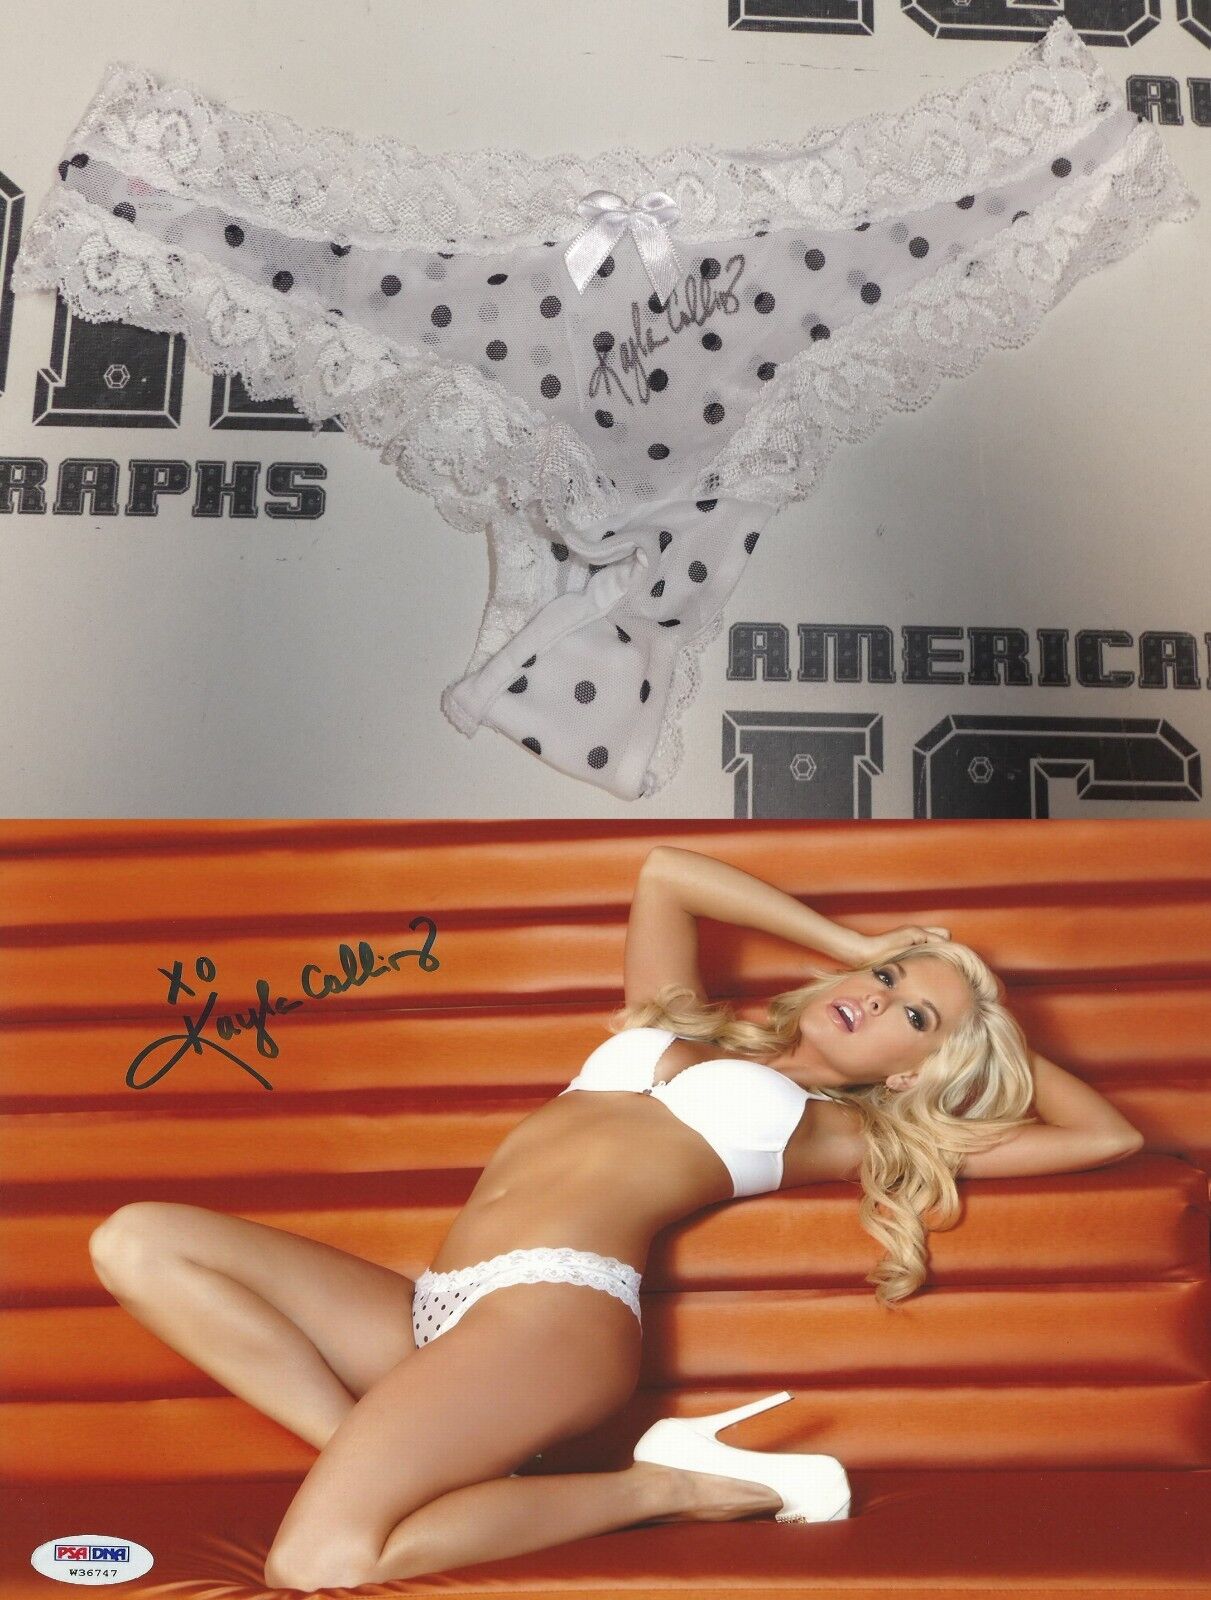 Kayla Collins Signed Signed Lingerie & 8x10 Photo Poster painting PSA/DNA COA Playboy Playmate 1